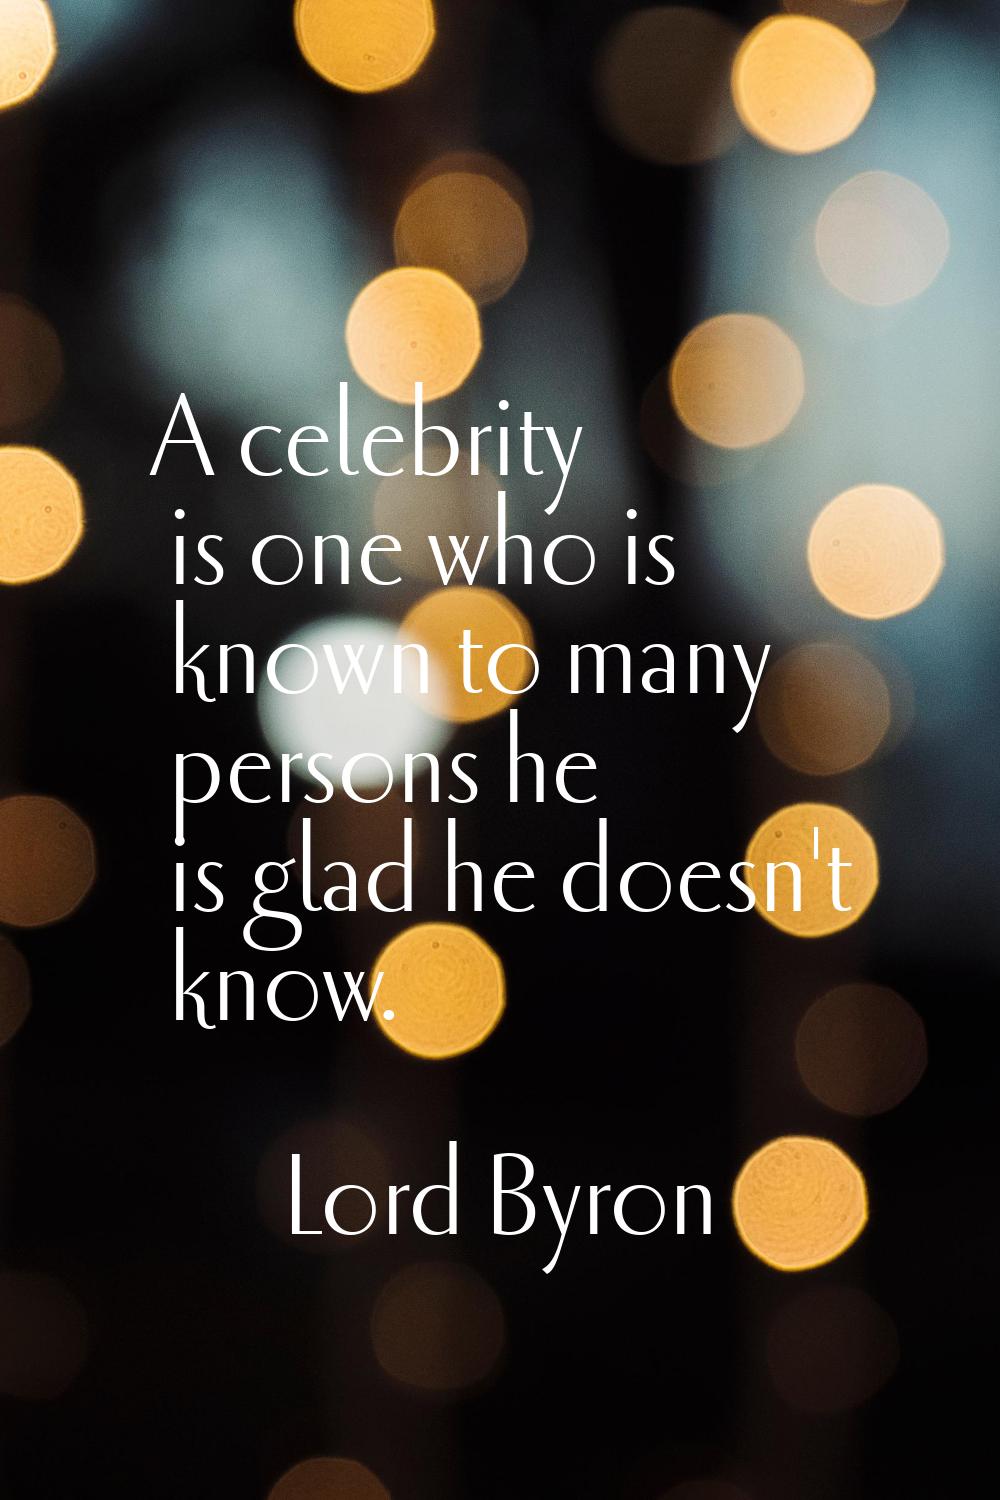 A celebrity is one who is known to many persons he is glad he doesn't know.